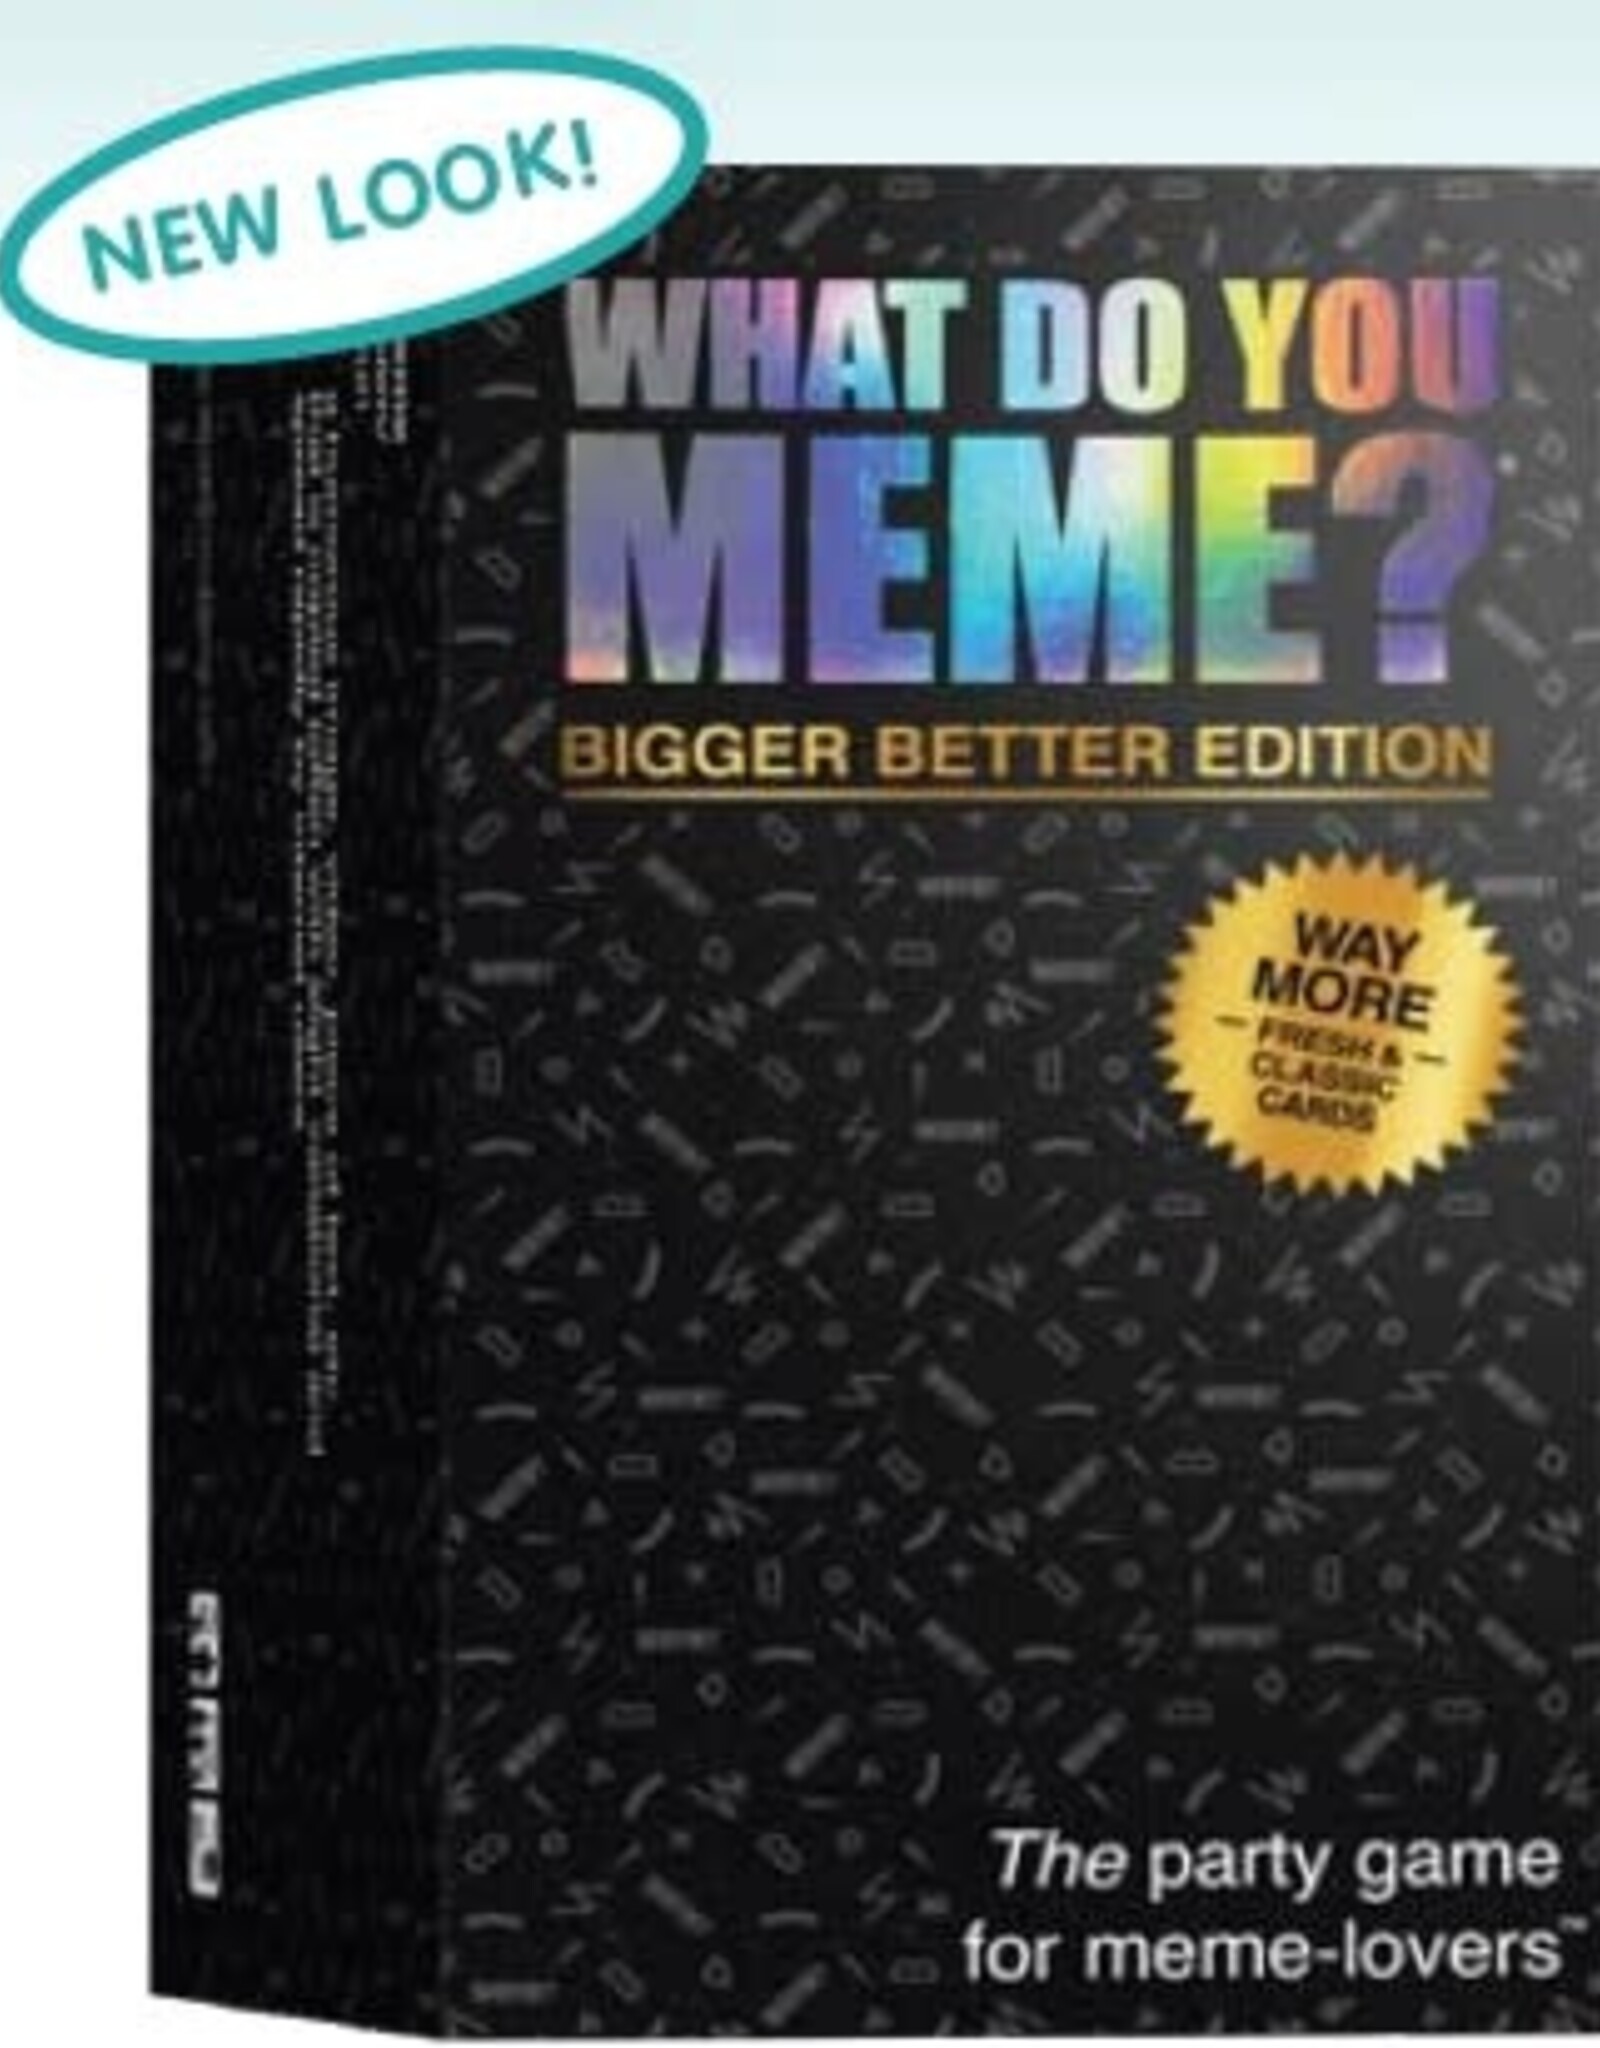 How To Play - WHAT DO YOU MEME? 